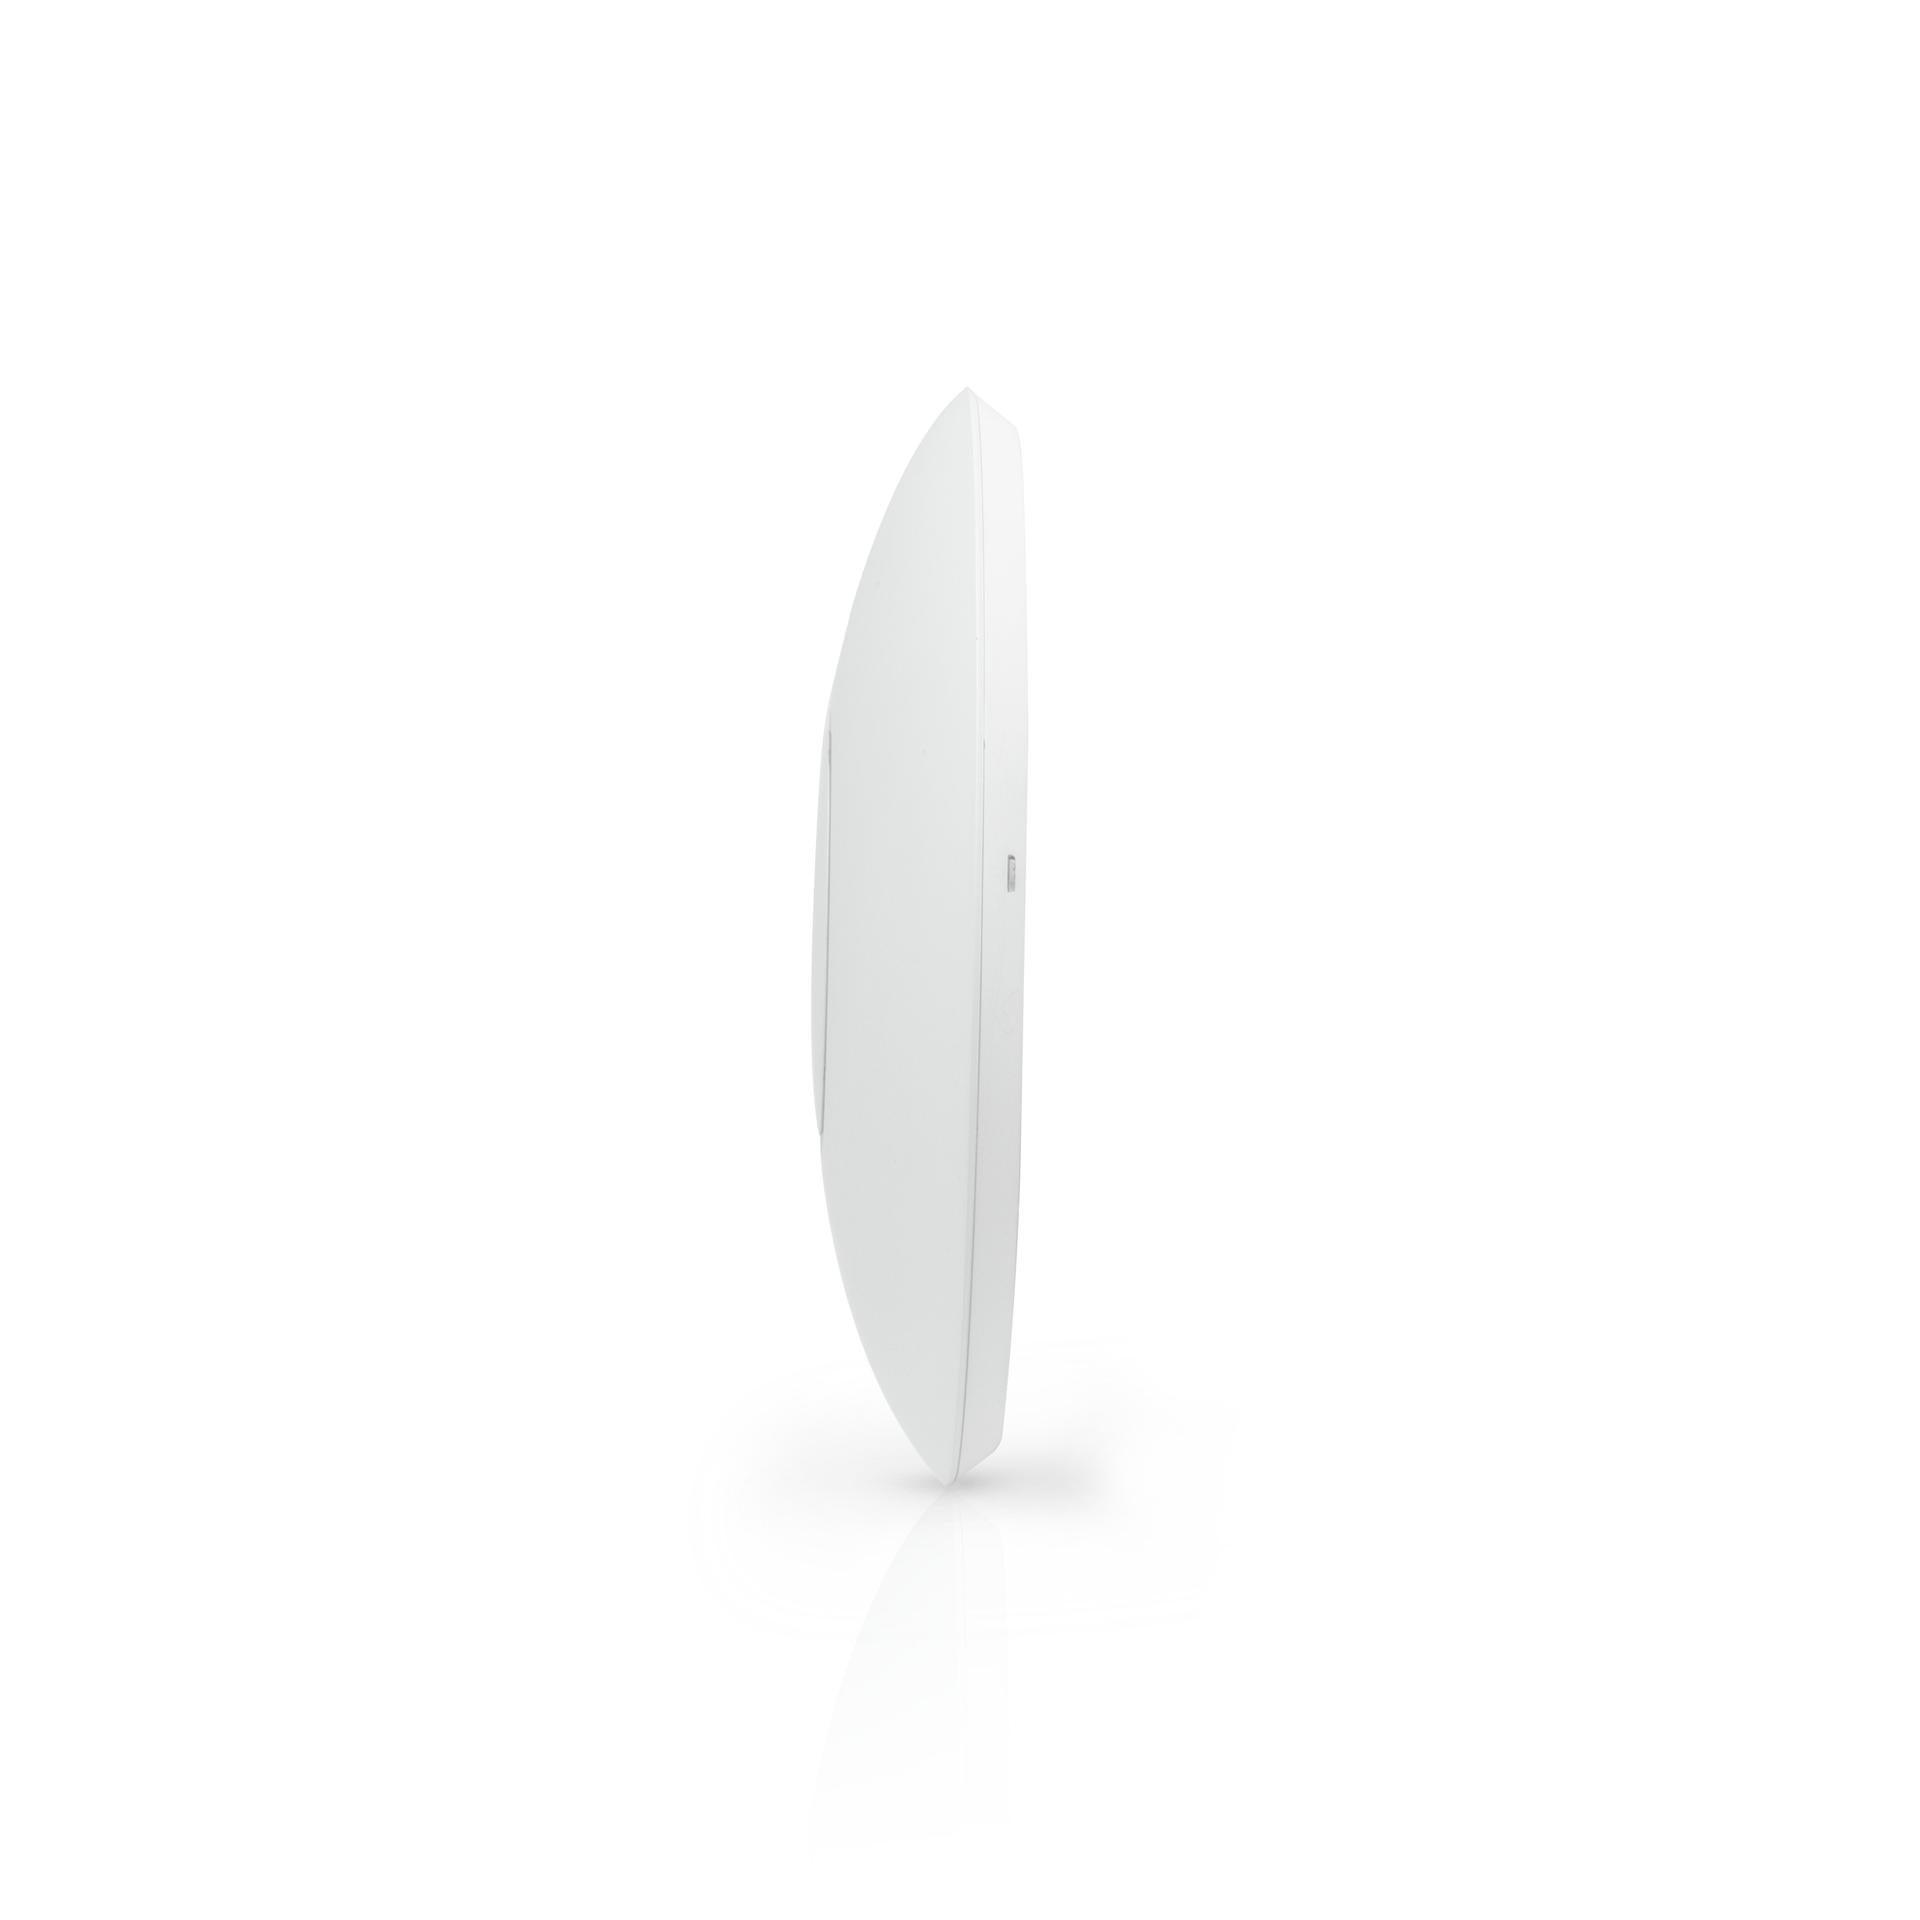 Ubiquiti UniFi UAP-AC-PRO WiFi 5 3x3 PoE Indoor/Outdoor Access Point Side View Image